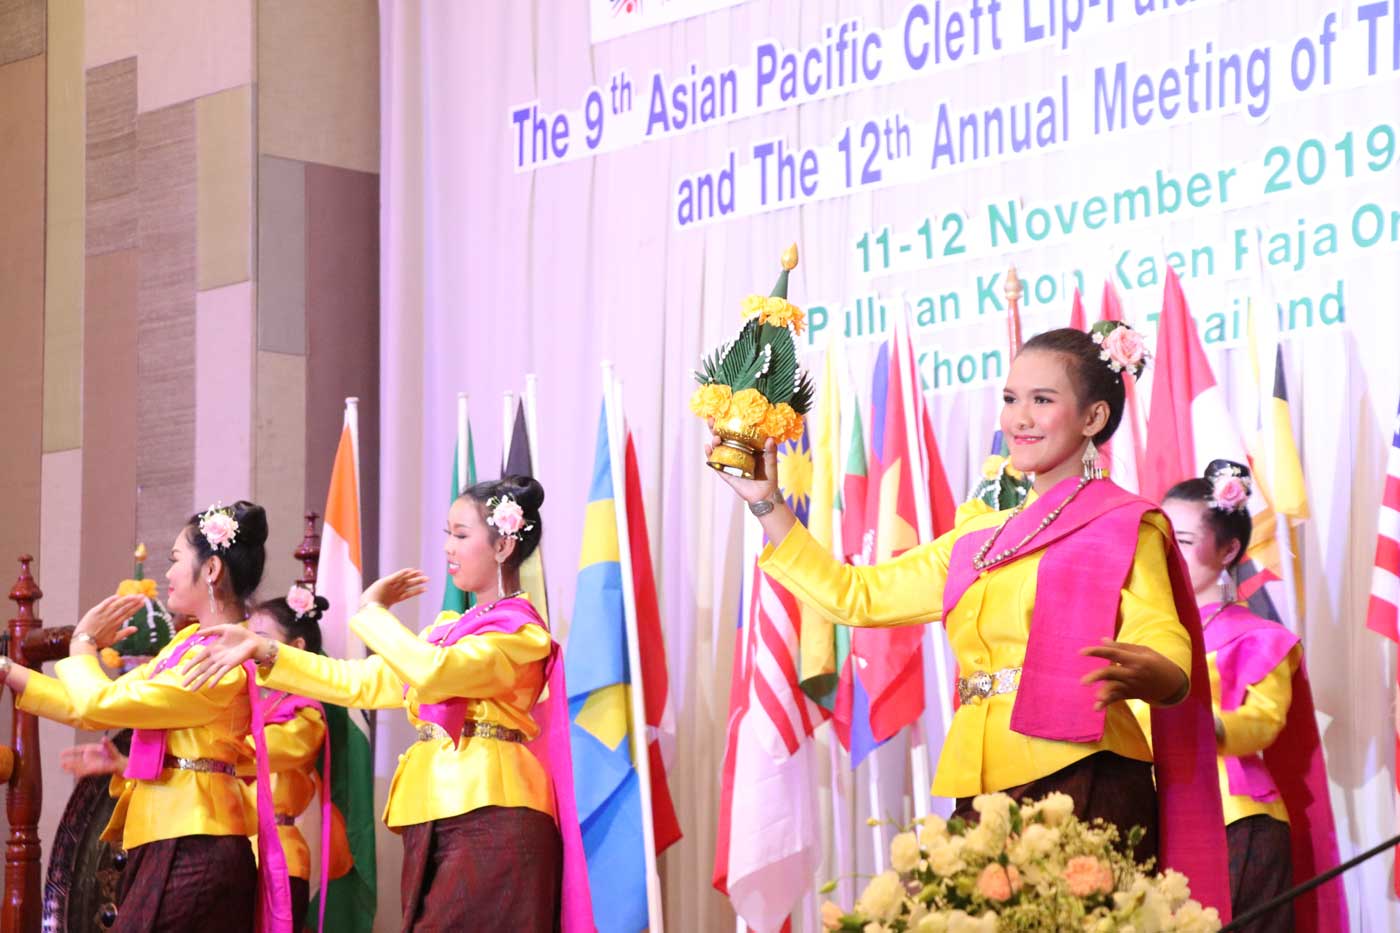 Welcome Performance by a Cleft Patient in the opening ceremony of the 12th Annual Meeting of the Thai Cleft Lip-Palate and Craniofacial Association